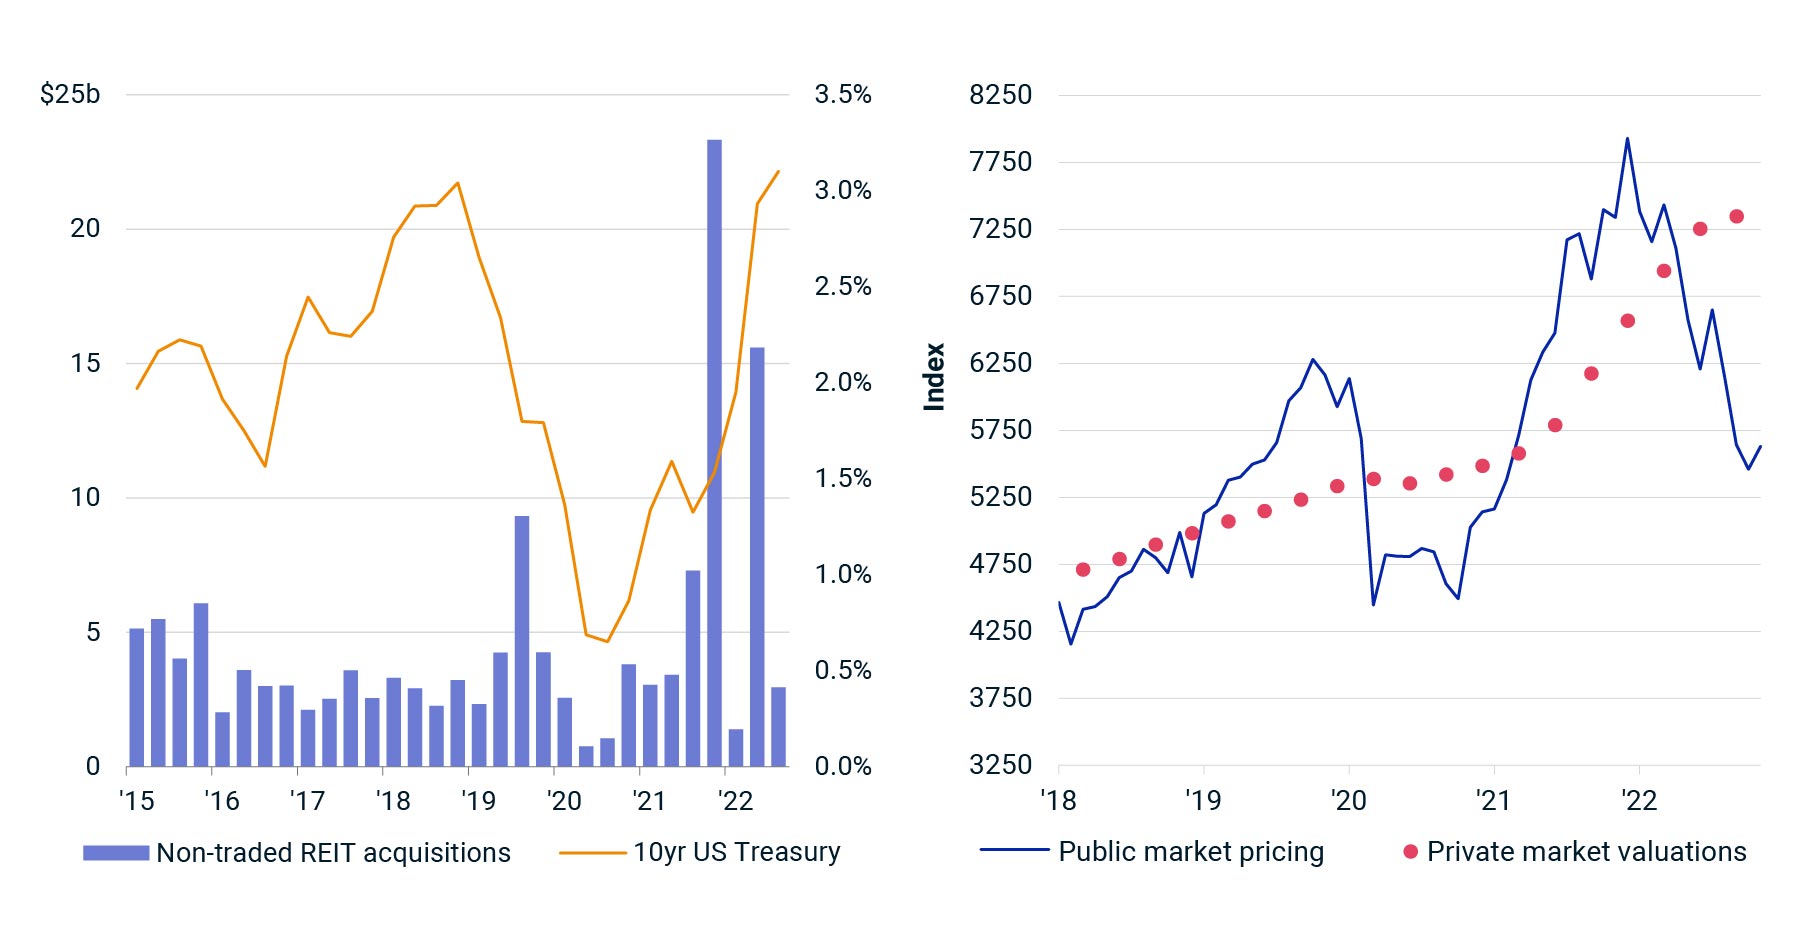 These charts show acquisition trends for non-traded private REITs and public apartment REIT prices vs. appraised values